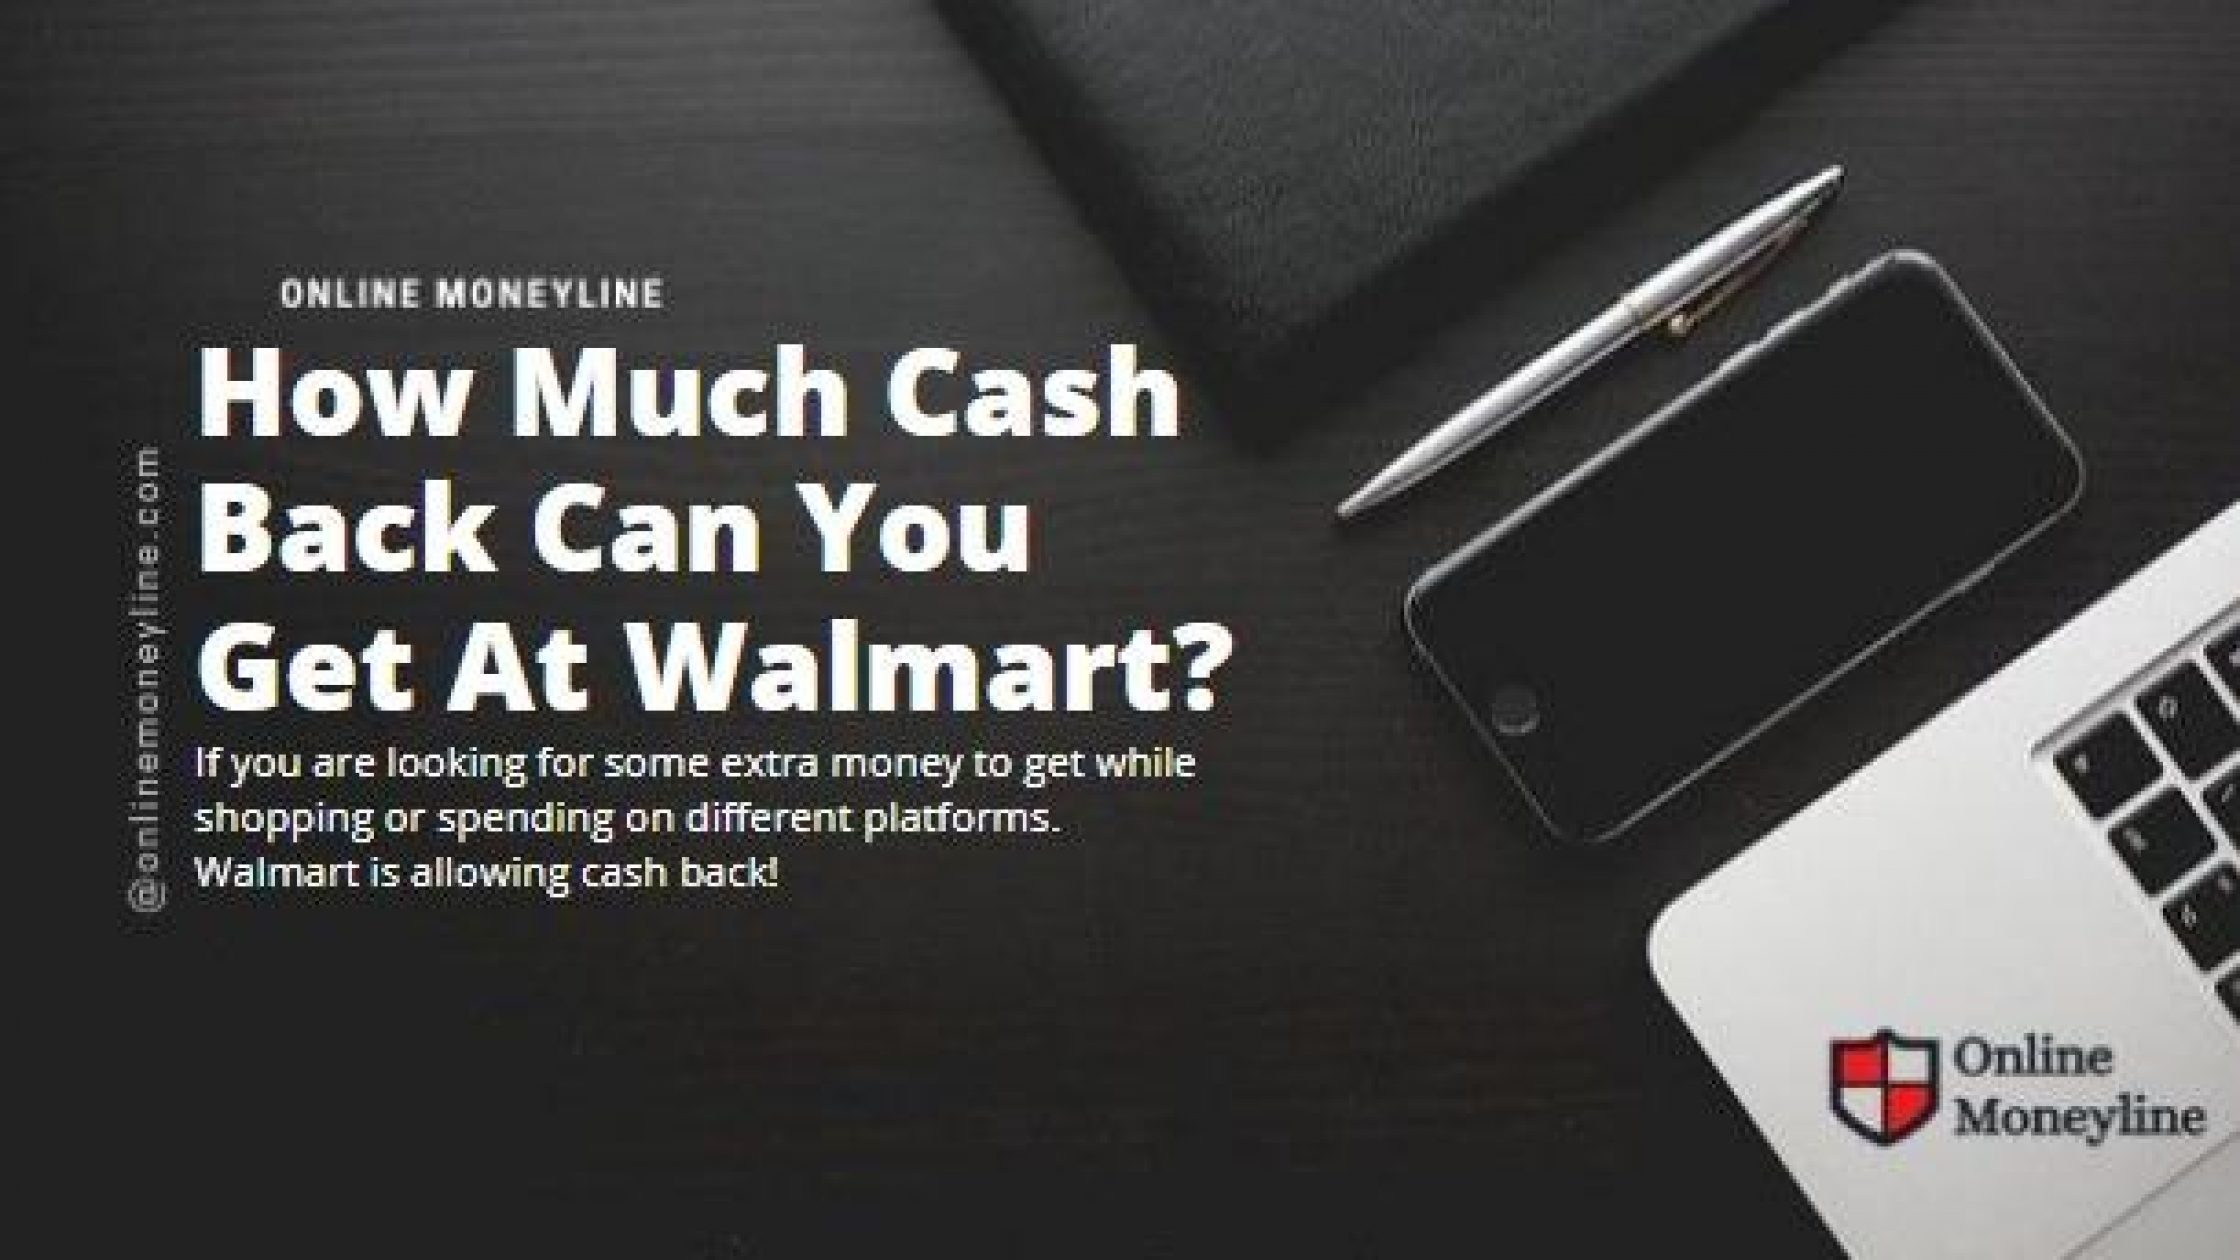 How Much Cash Back Can You Get At Walmart?